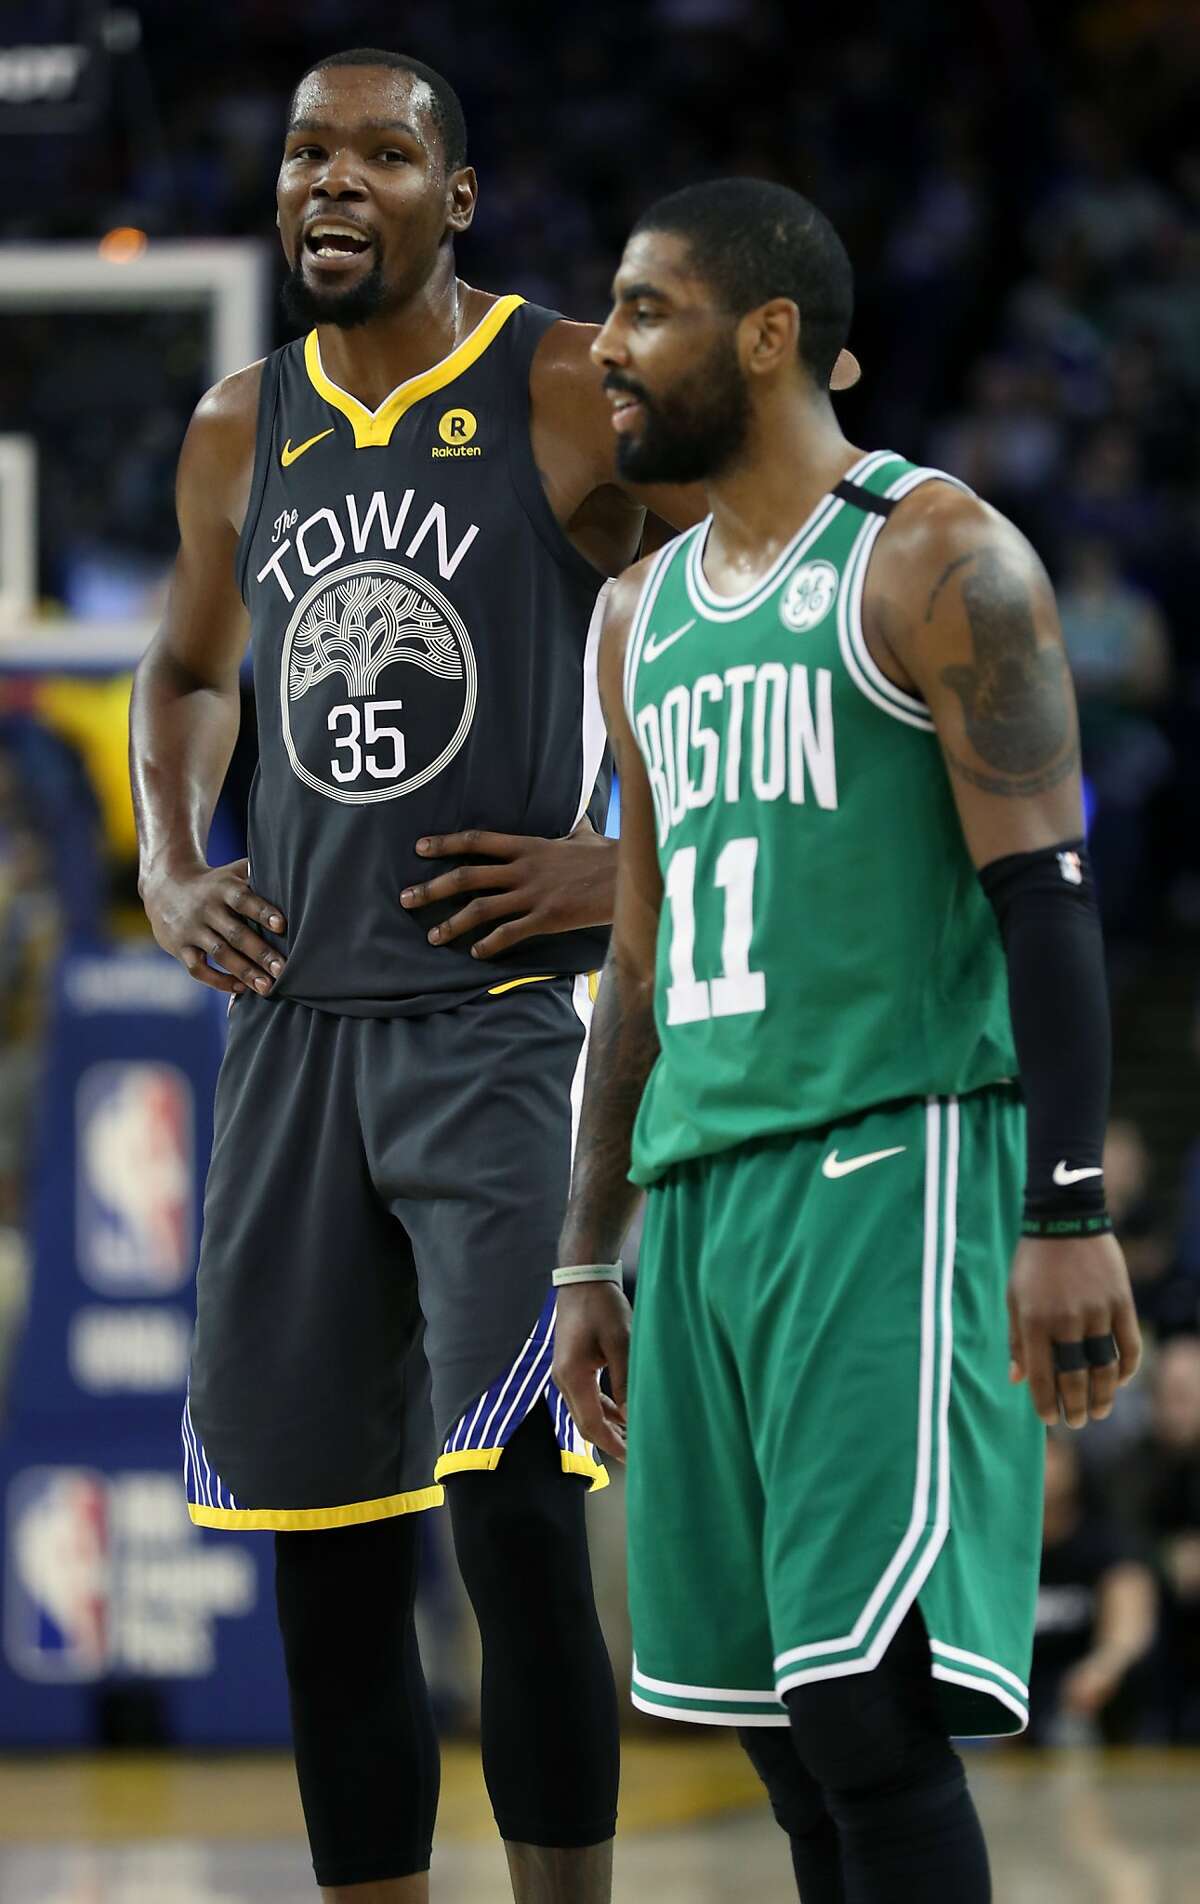 Golden State Warriors' Kevin Durant and Boston Celtics' Kyrie Irving during Warriors' 109-105 win in NBA game at Oracle Arena in Oakland, Calif., on Saturday, January 27, 2018.